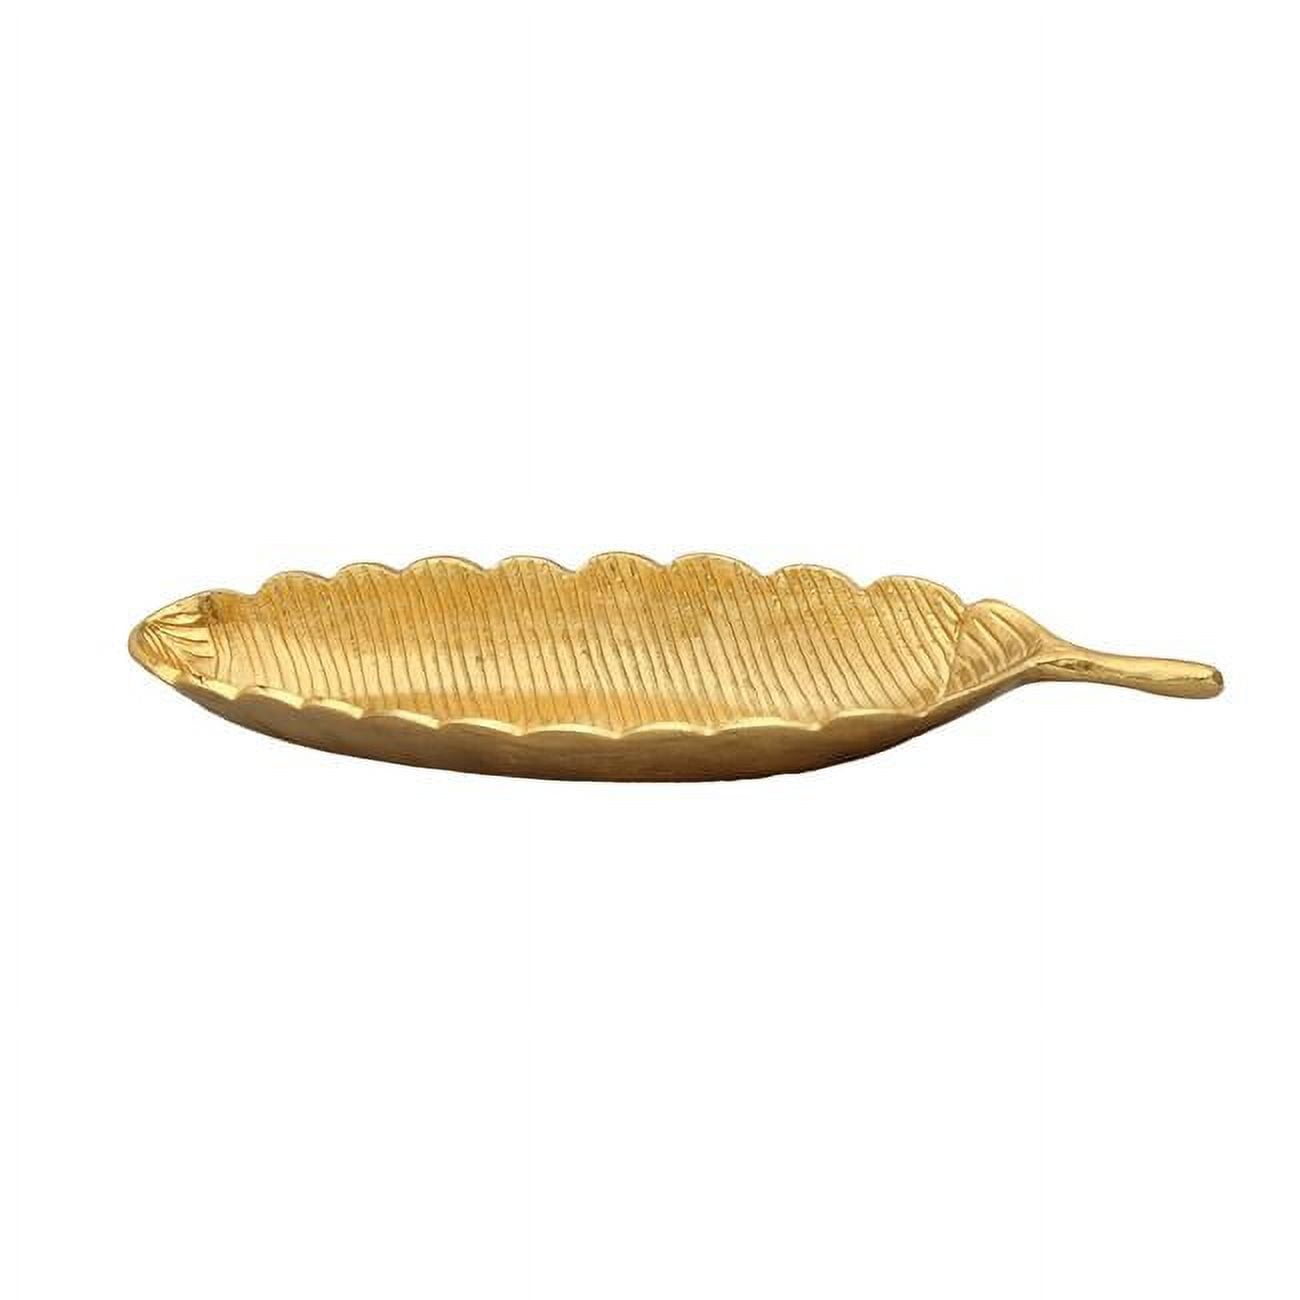 Classic Touch Lp1009 Gold Leaf Shaped Platter With Vein Design